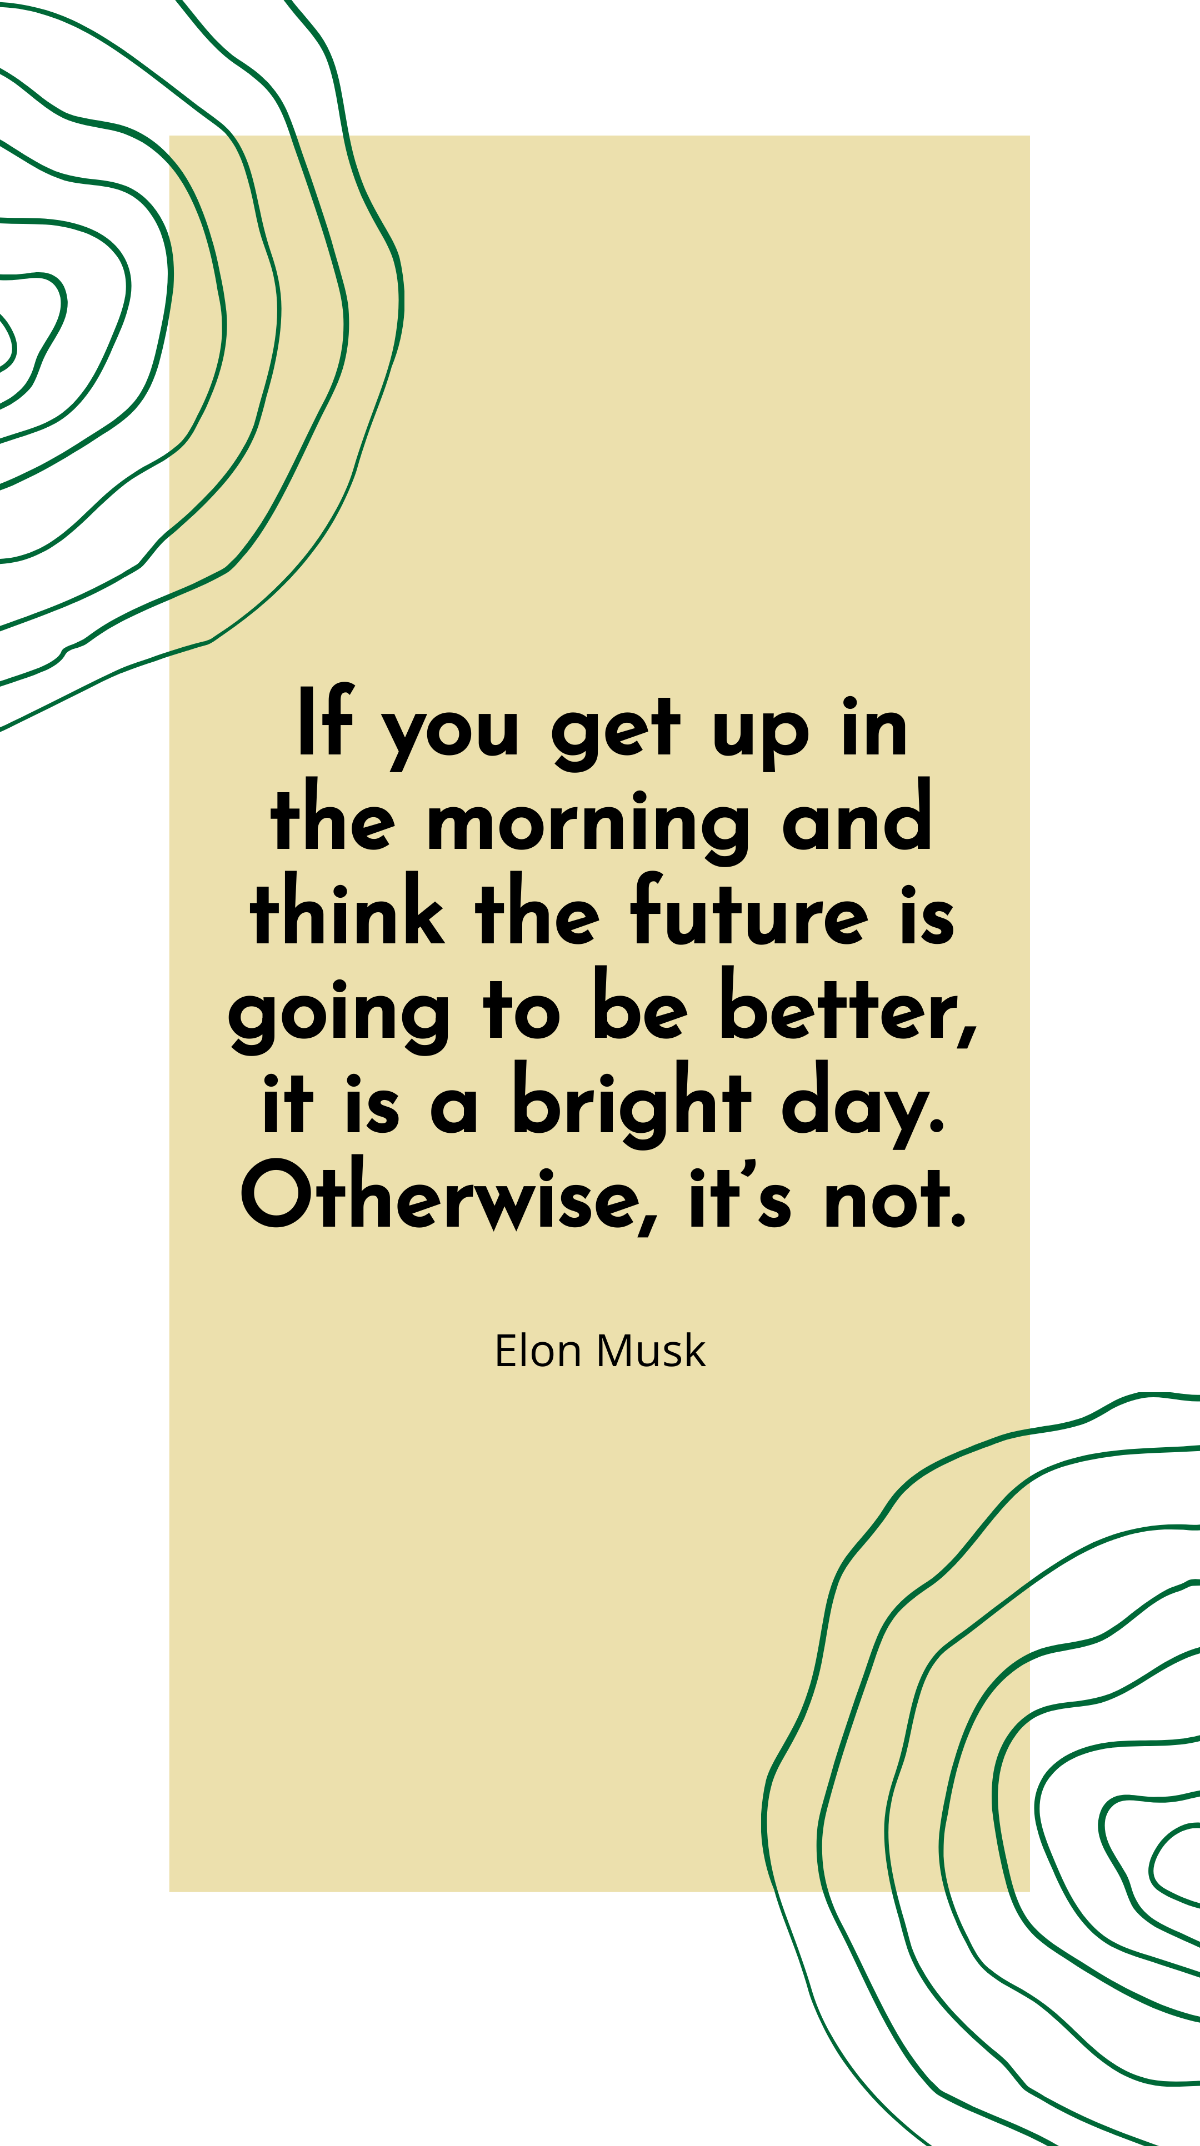 Elon Musk - If you get up in the morning and think the future is going to be better, it is a bright day. Otherwise, it’s not. Template